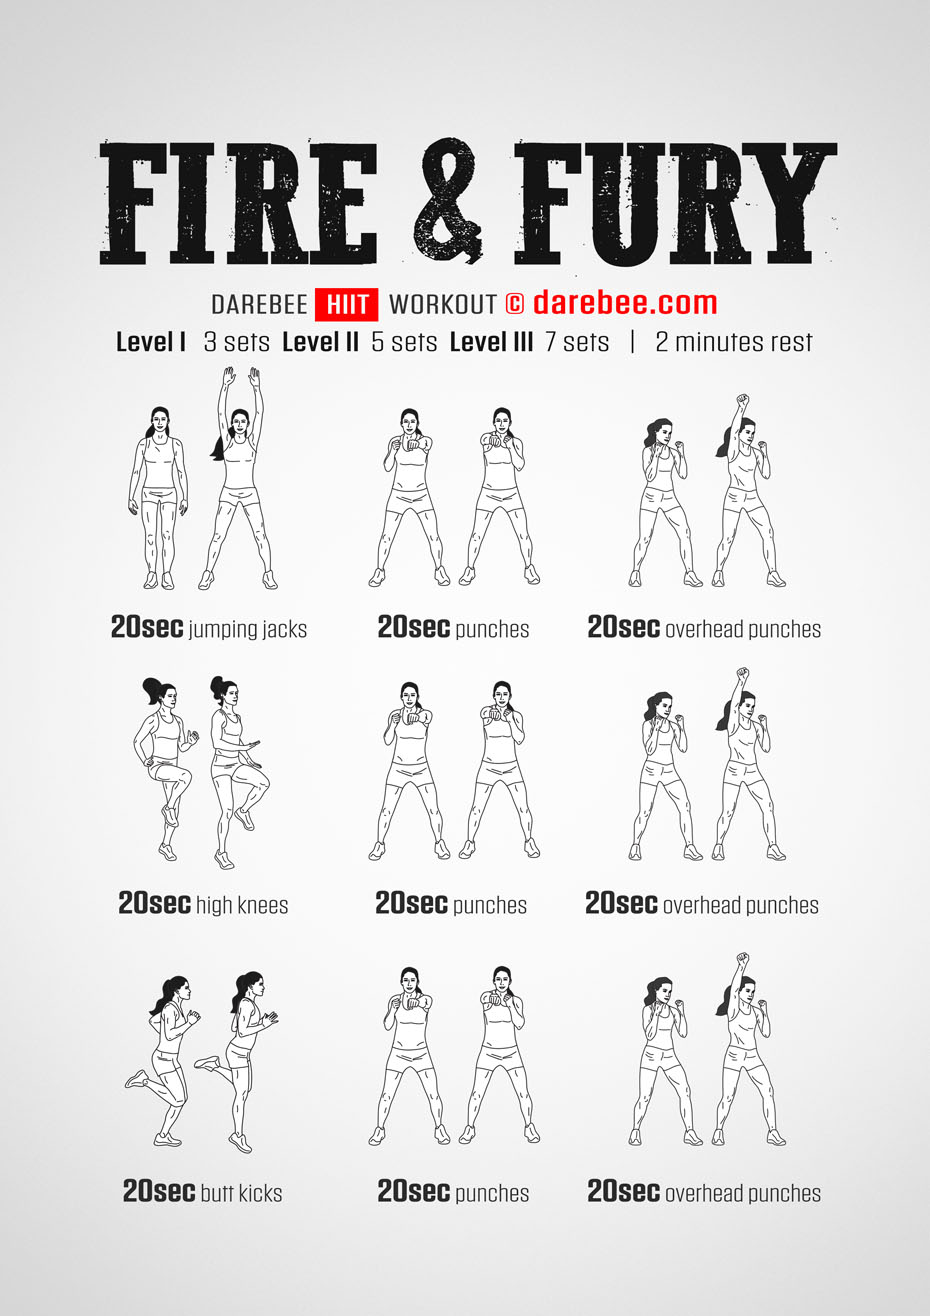 100 HIIT Workouts by DAREBEE